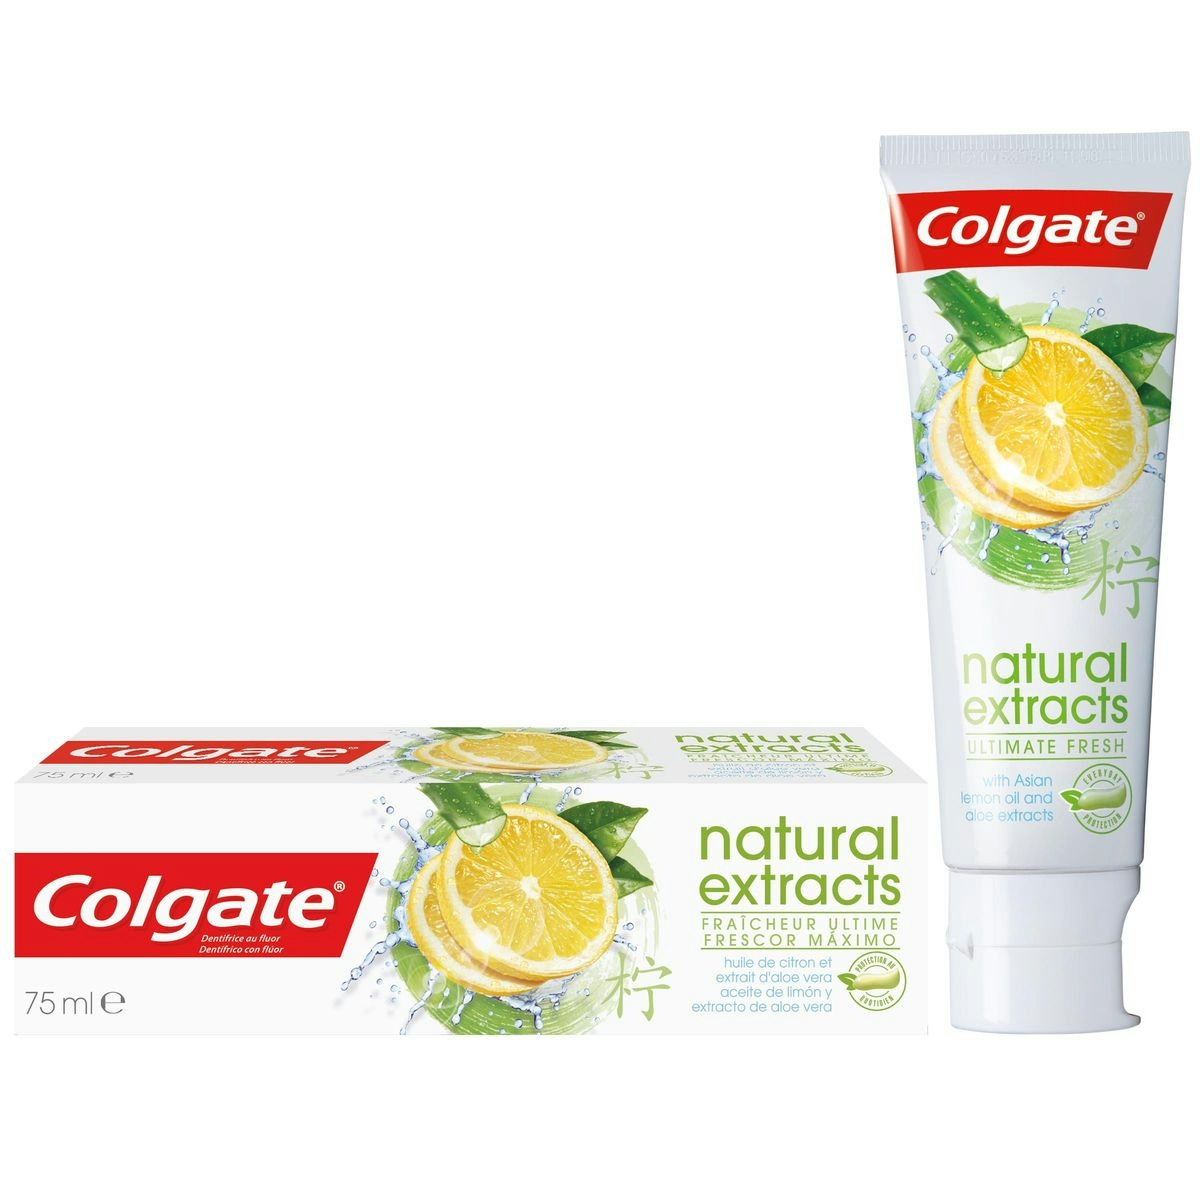 Pasta dentífrica COLGATE natural extracts limón tubo 75 ml